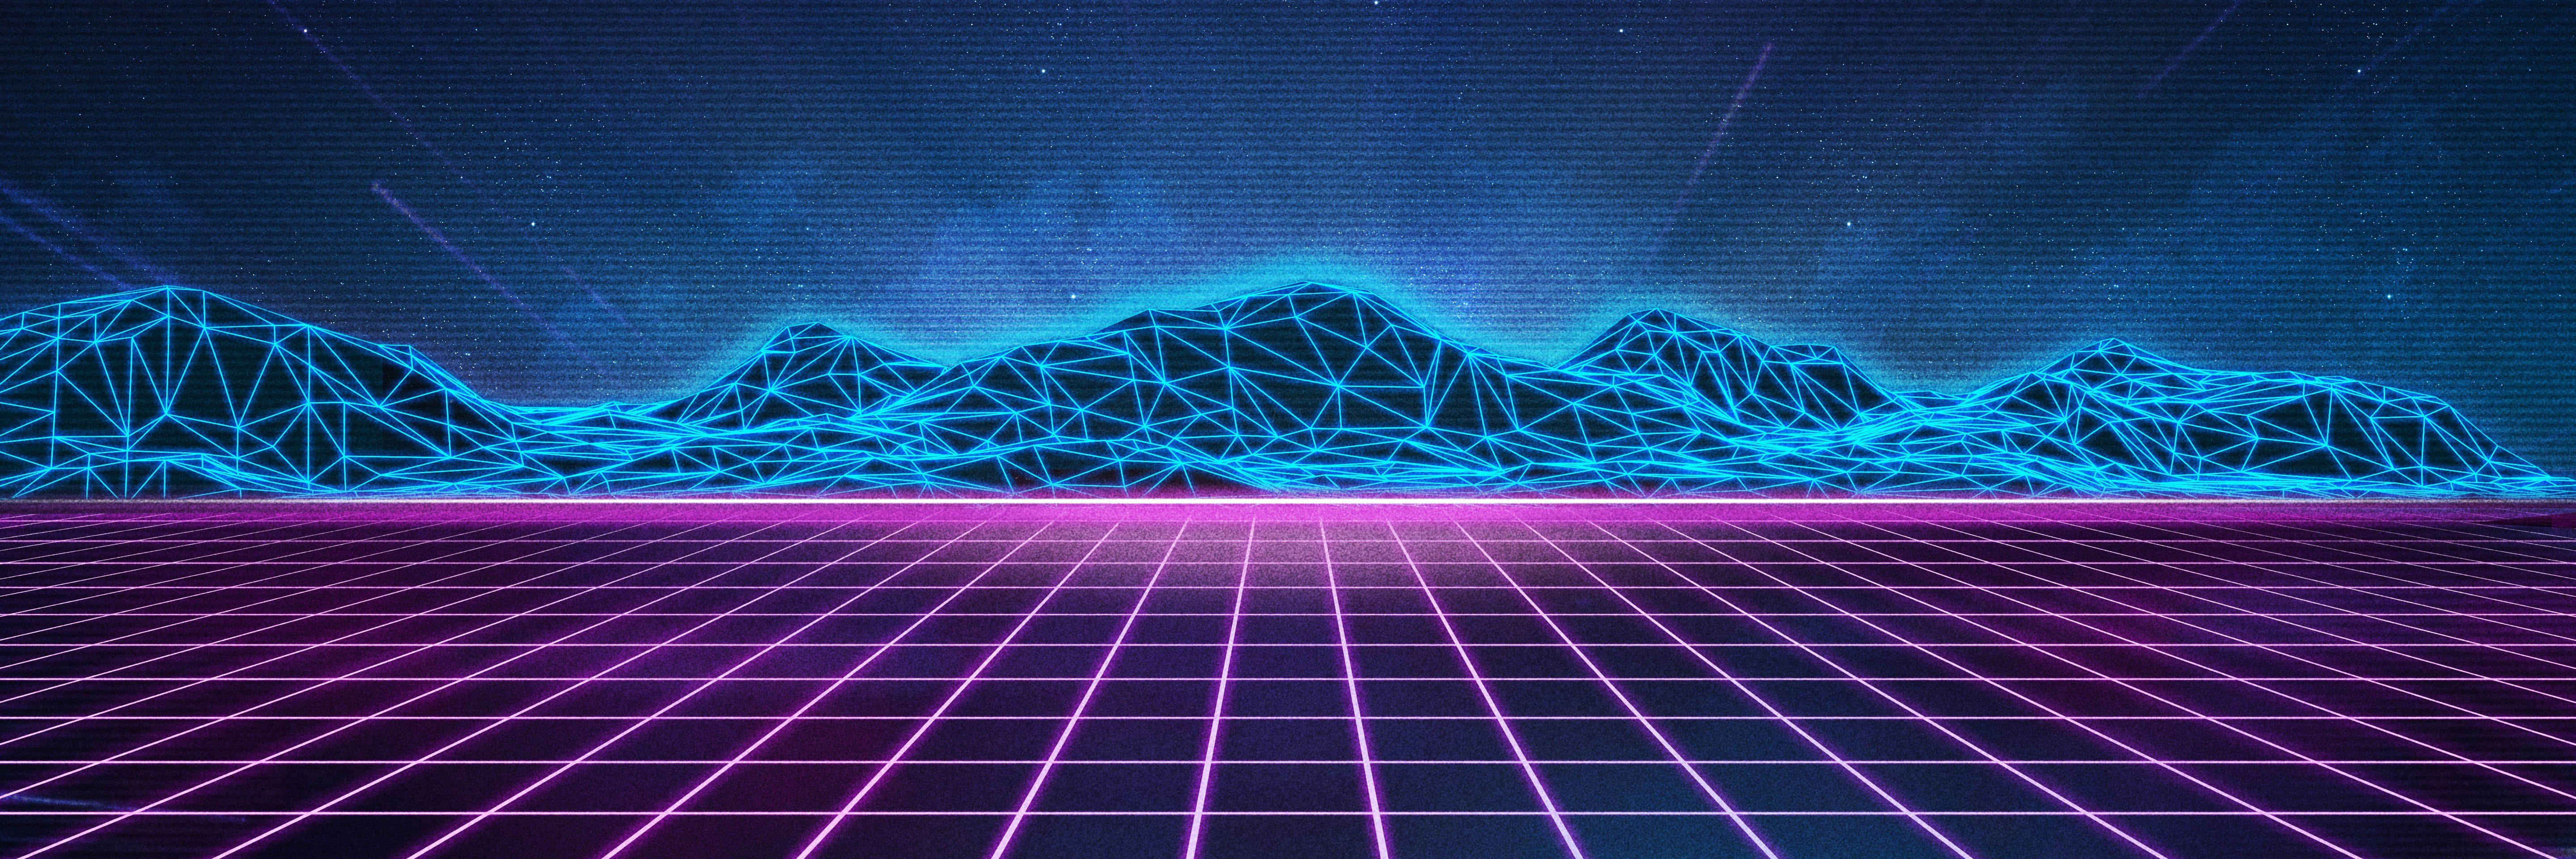 Synthwave Grid Mountains Wallpaper